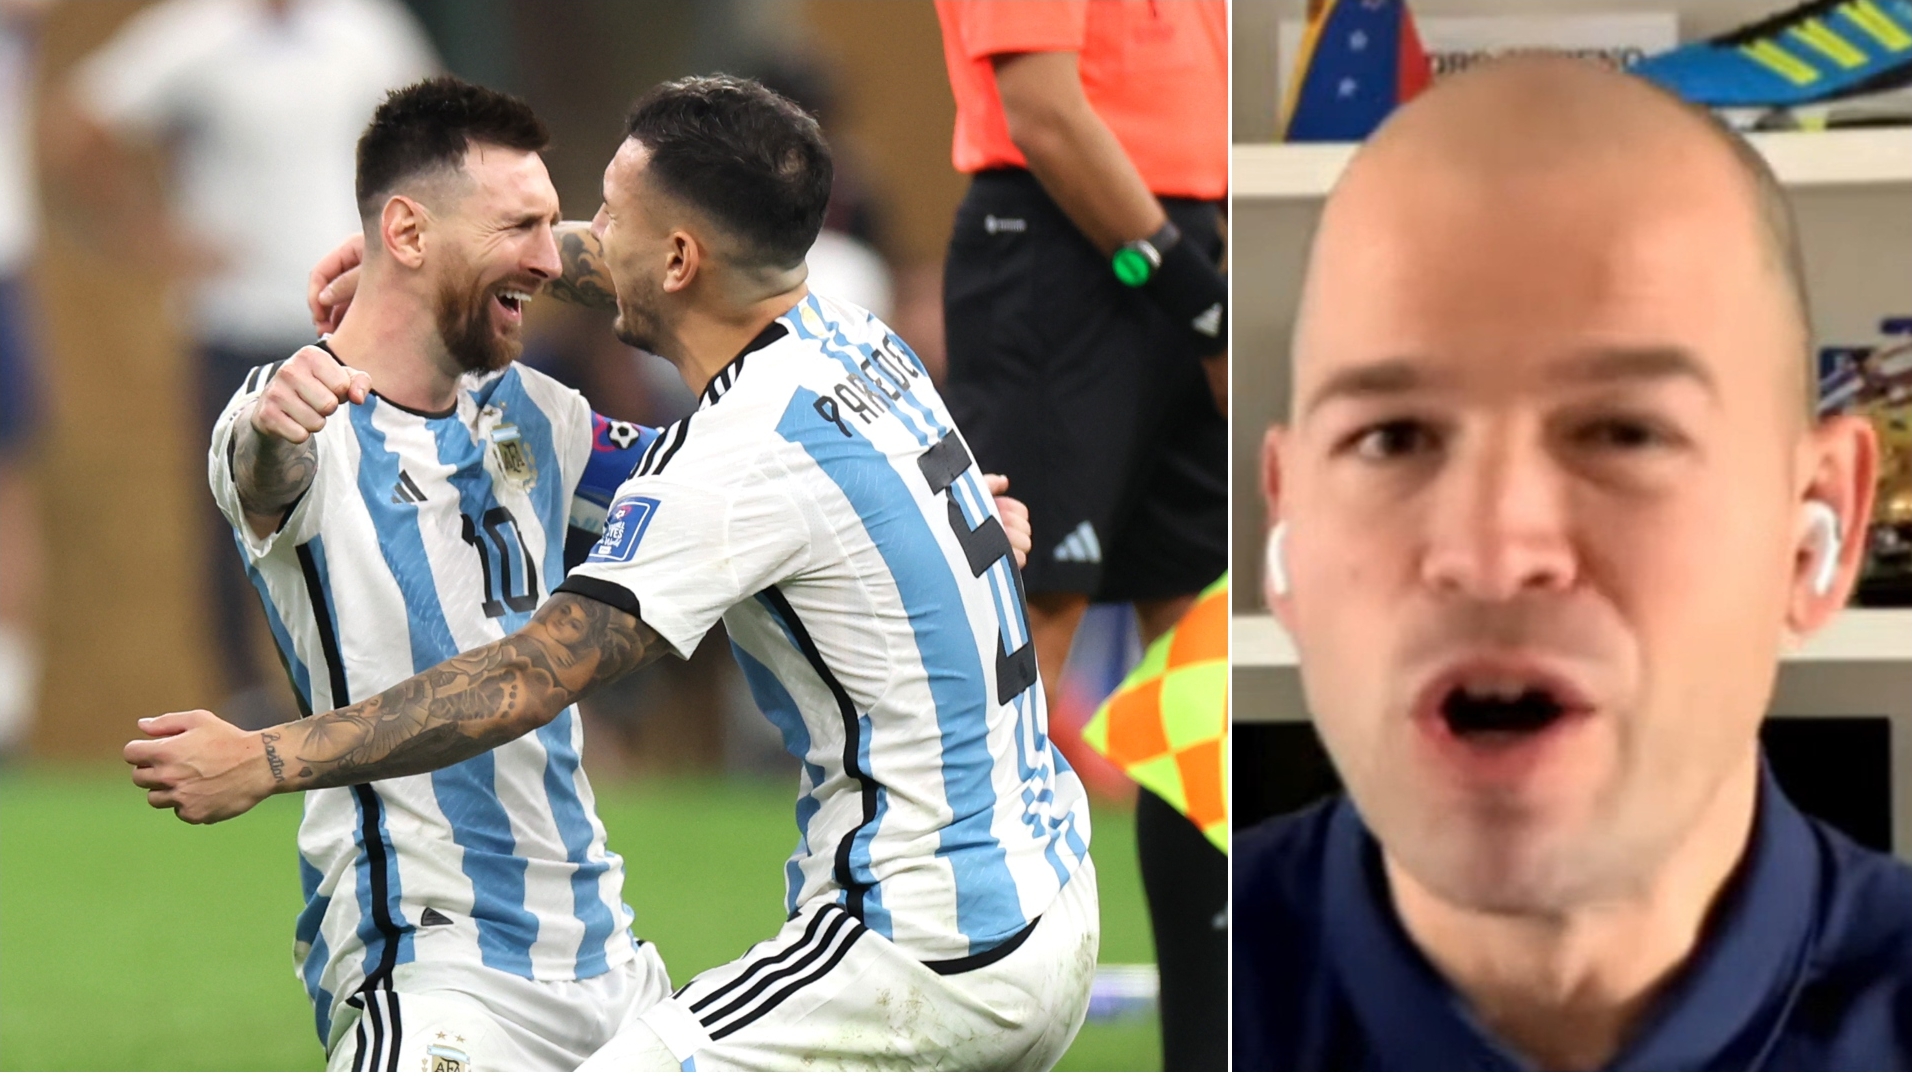 Moreno World Cup final the best game I have ever seen - Stream the Video